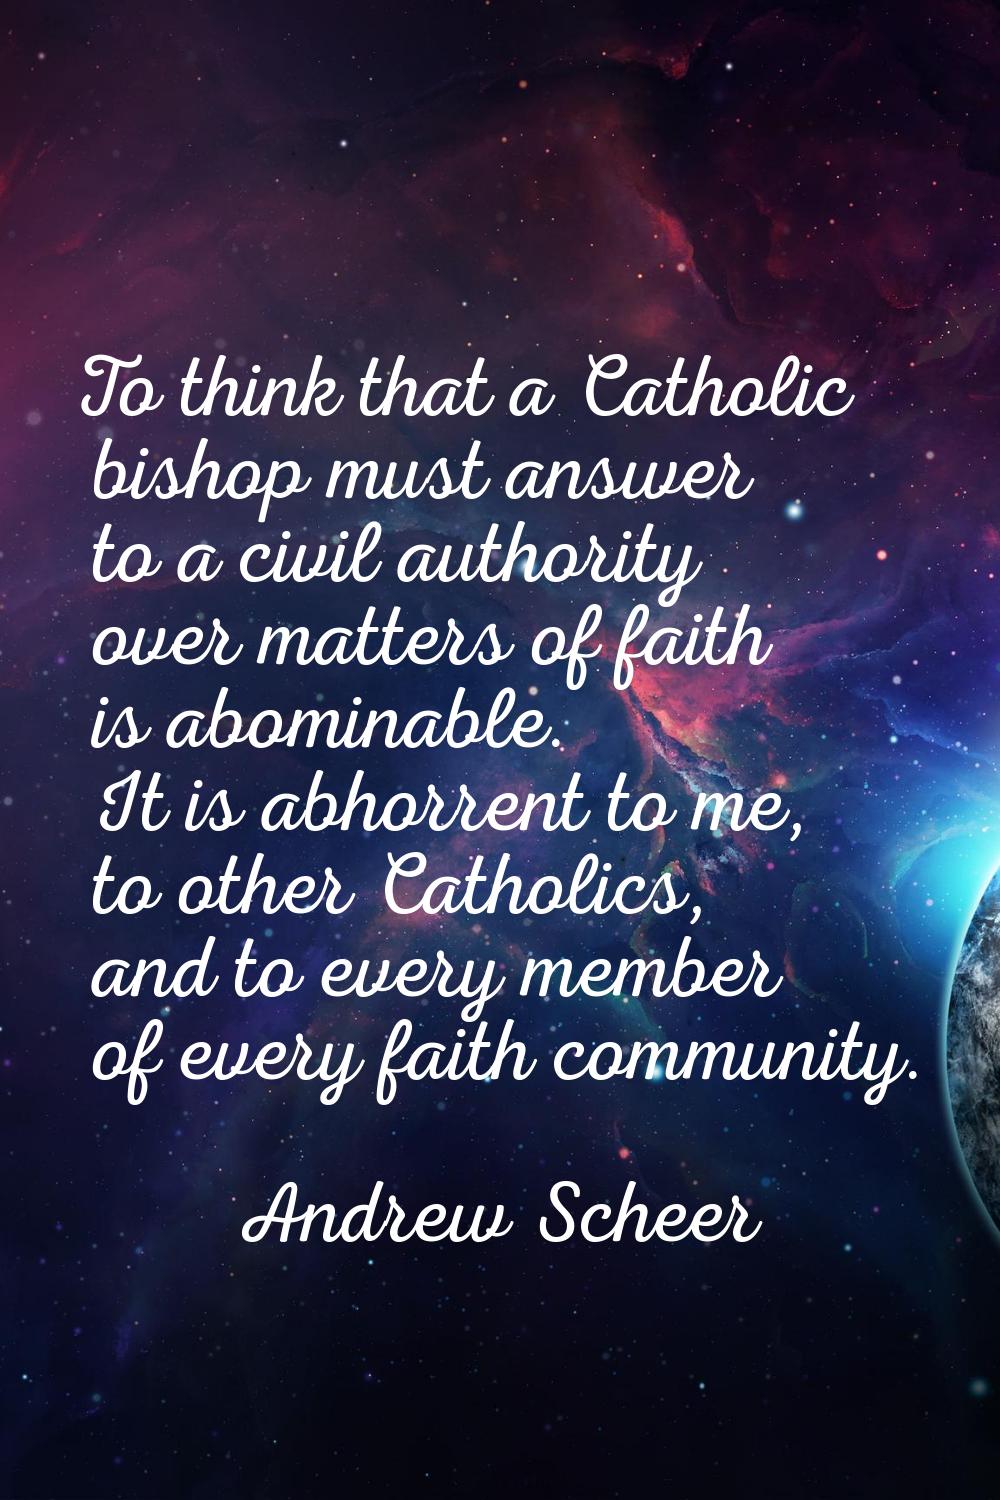 To think that a Catholic bishop must answer to a civil authority over matters of faith is abominabl